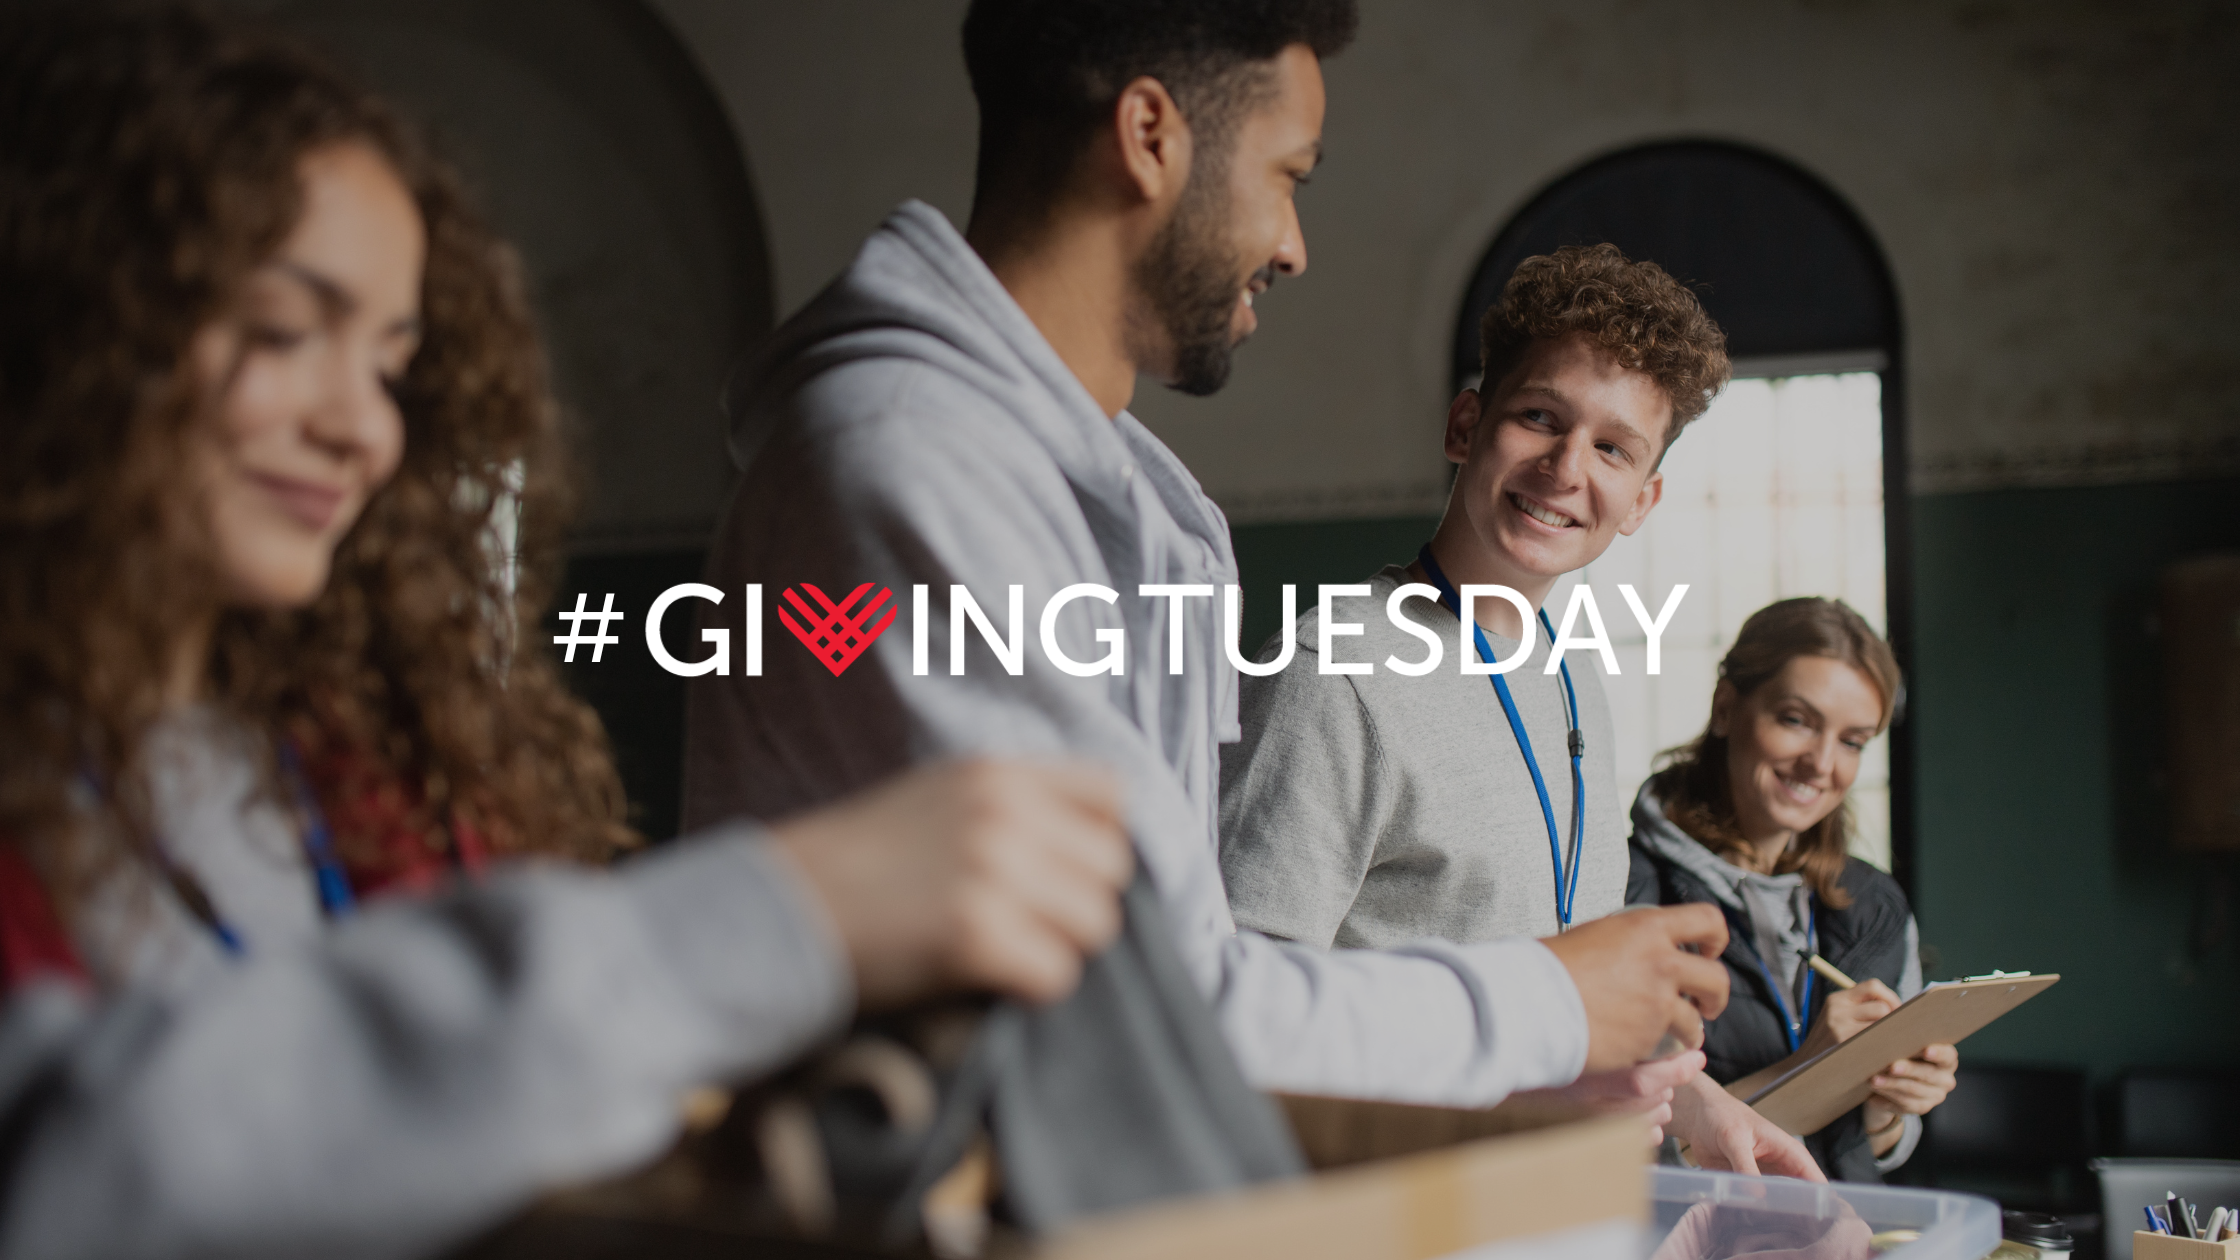 3 Ways to Make the Most of #GivingTuesday This Year